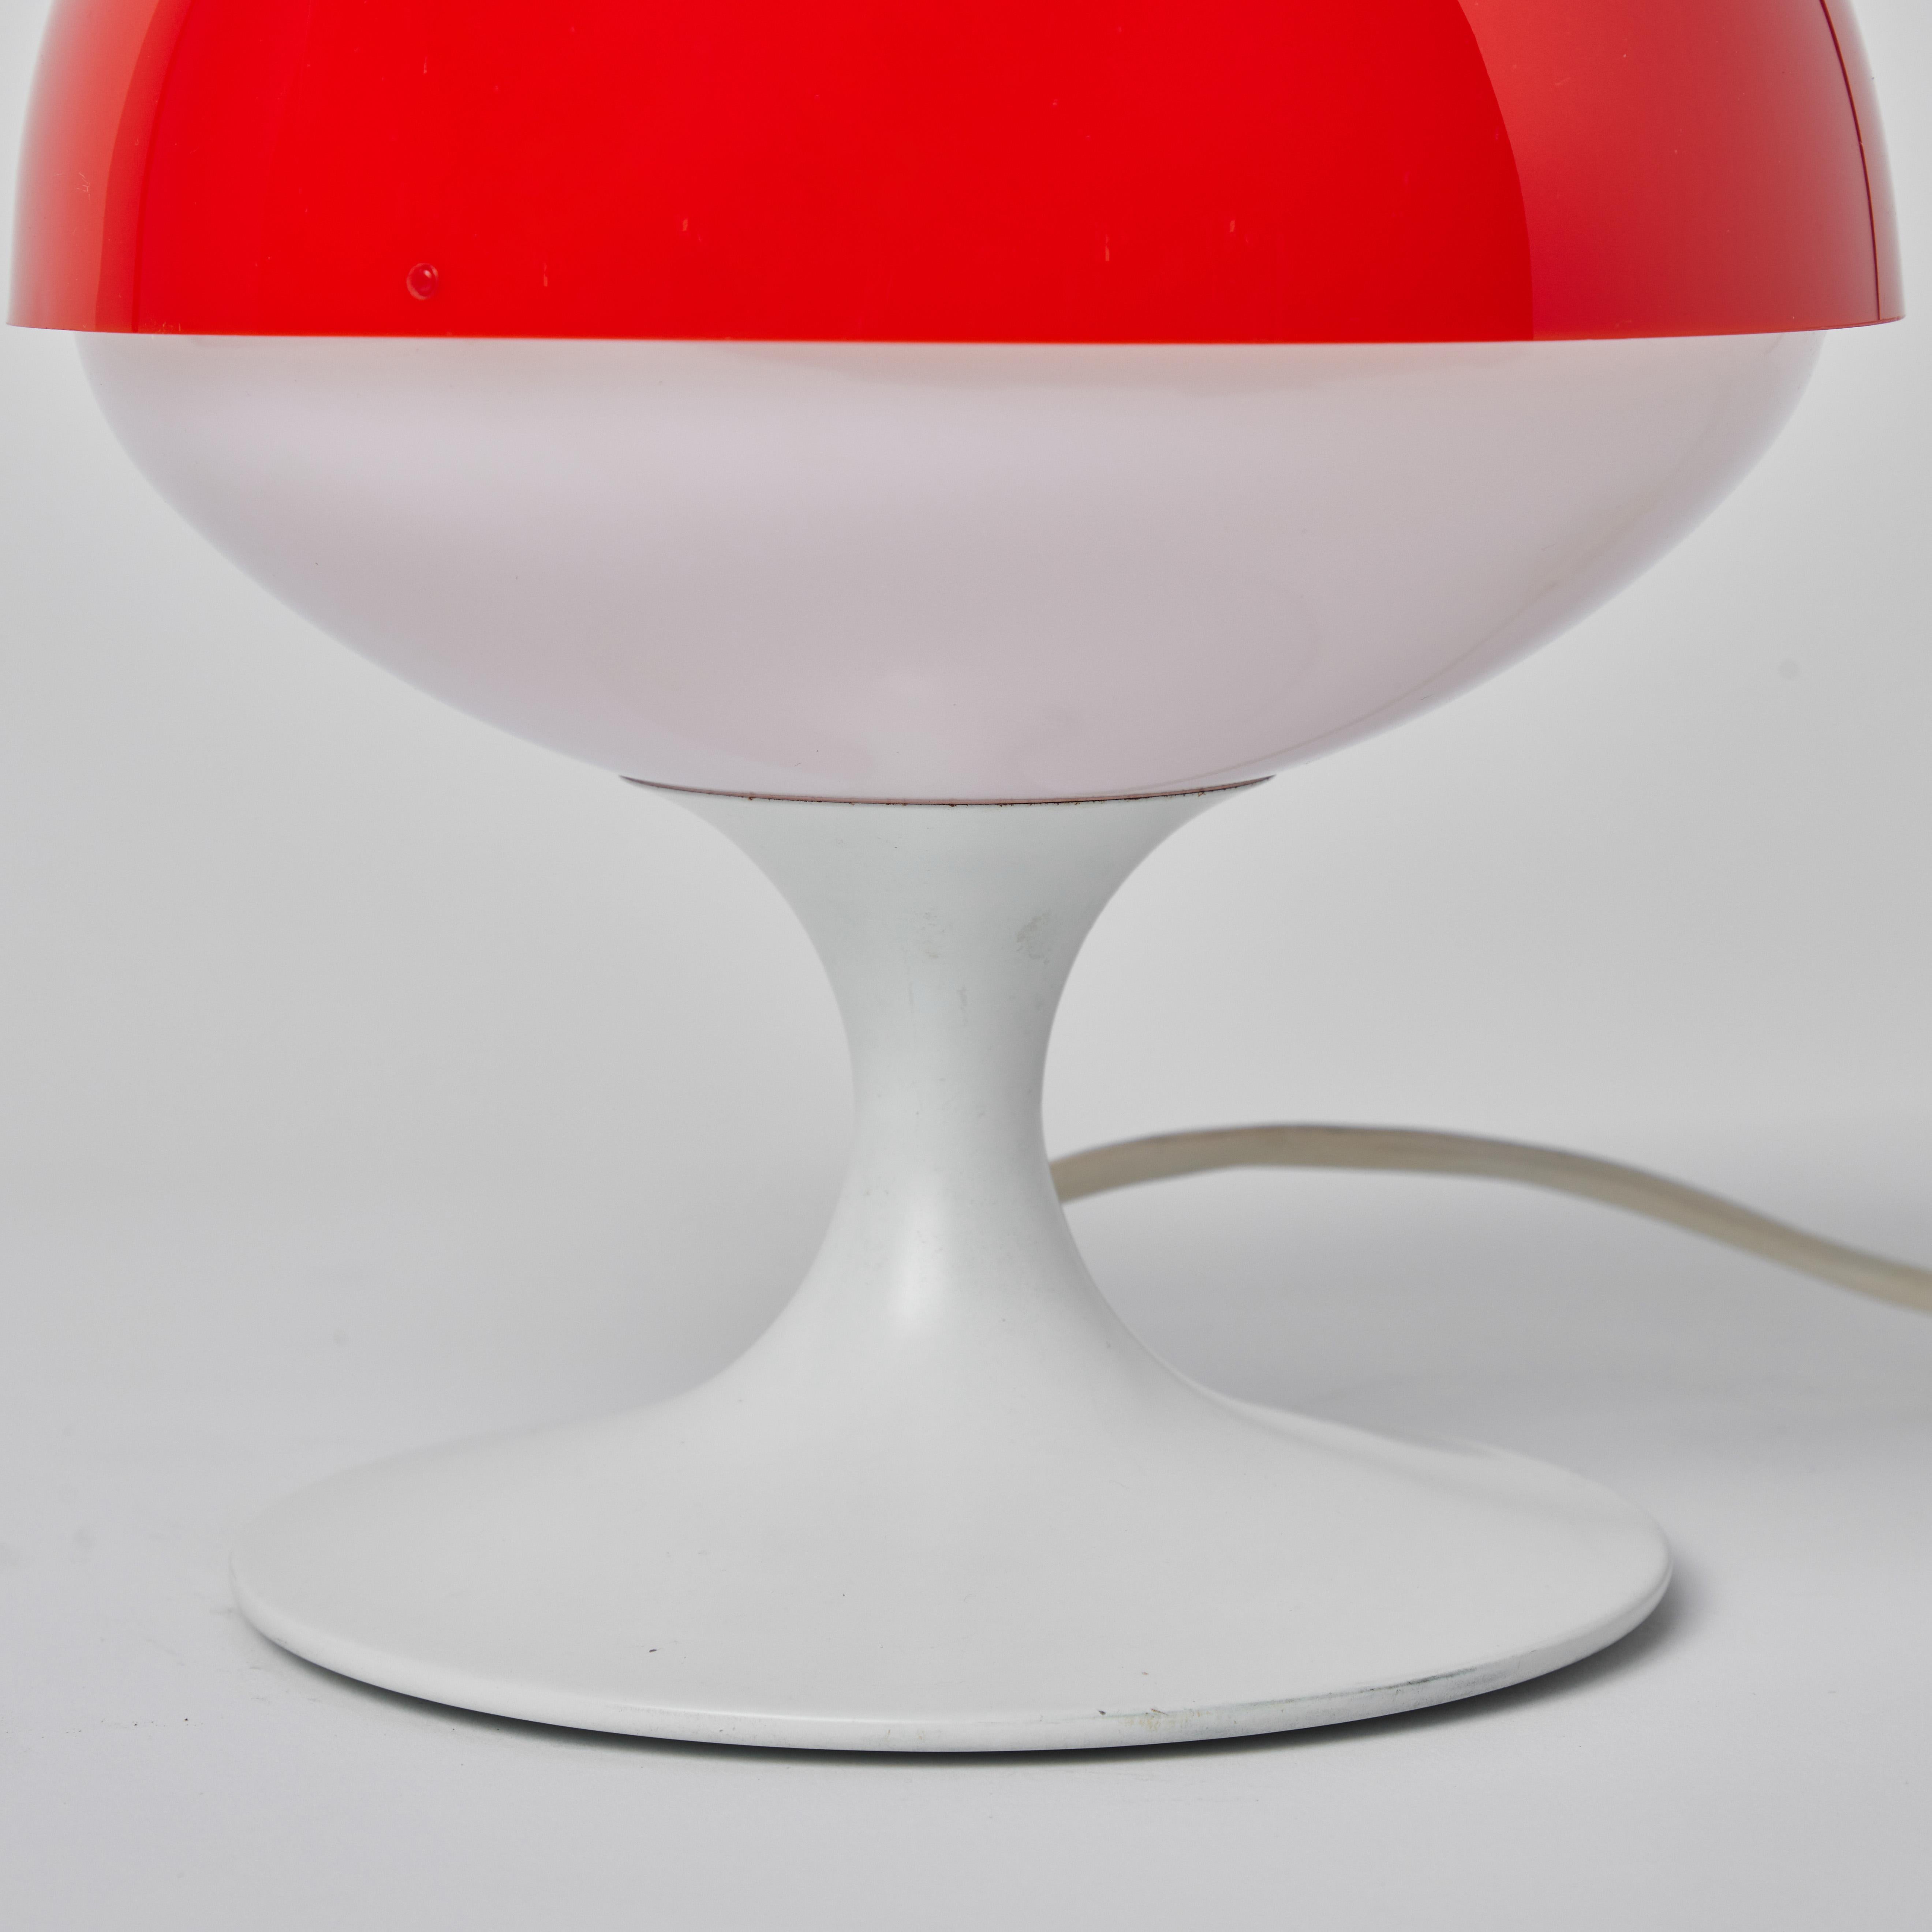 Pair of 1960s Max Bill Red & White Table Lamps for Temde Leuchten, Switzerland For Sale 7